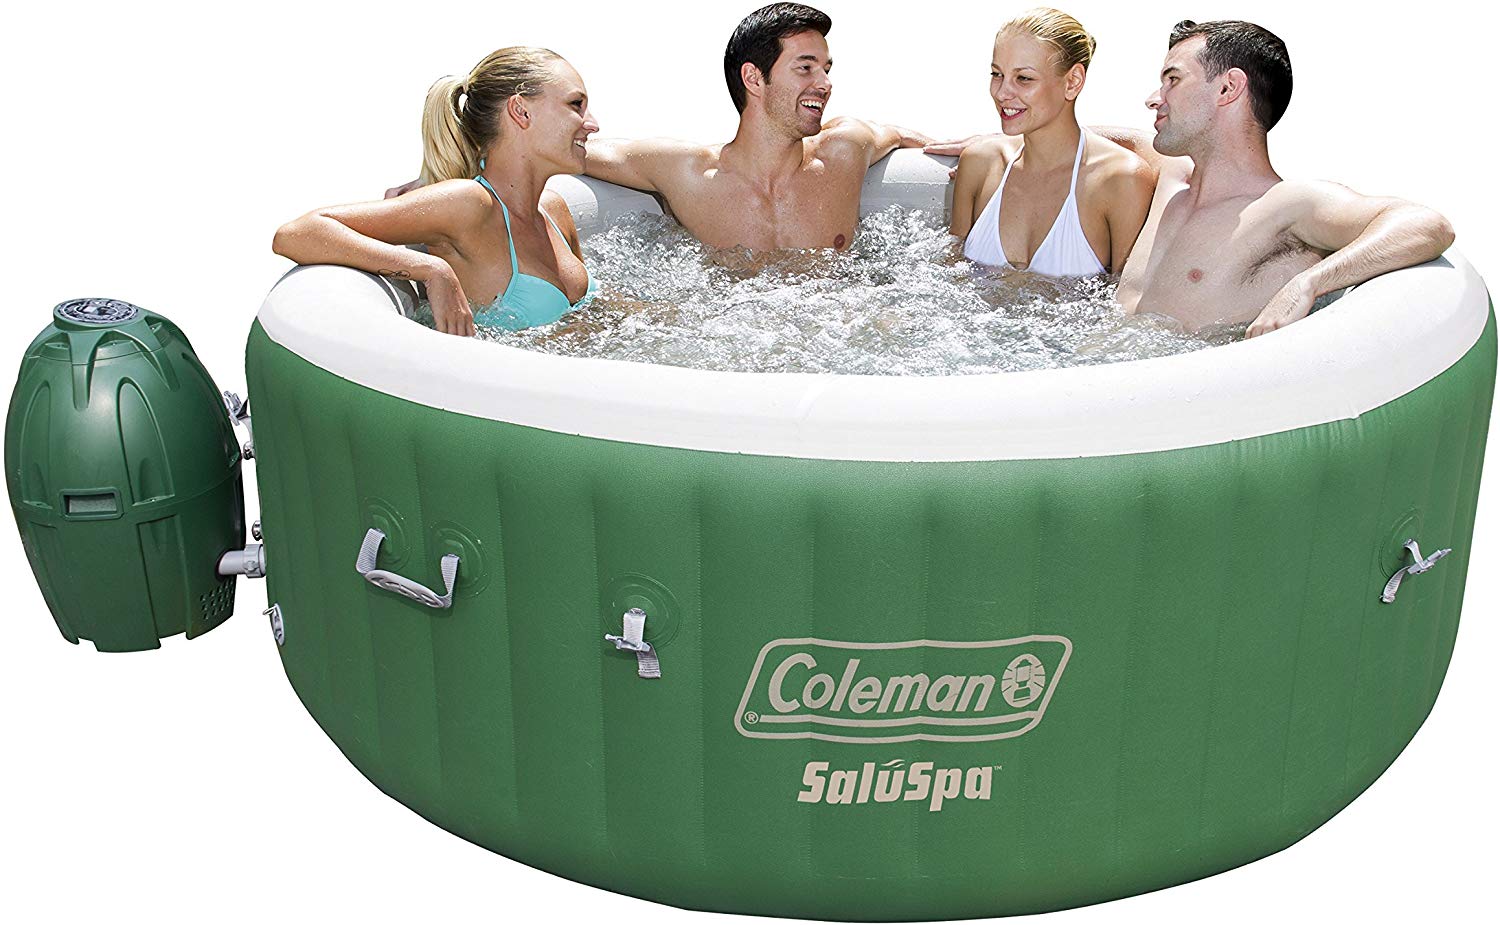 Best Inflatable Hot Tub [REVIEW] Blow Up Portable HotTub Spa [2022]